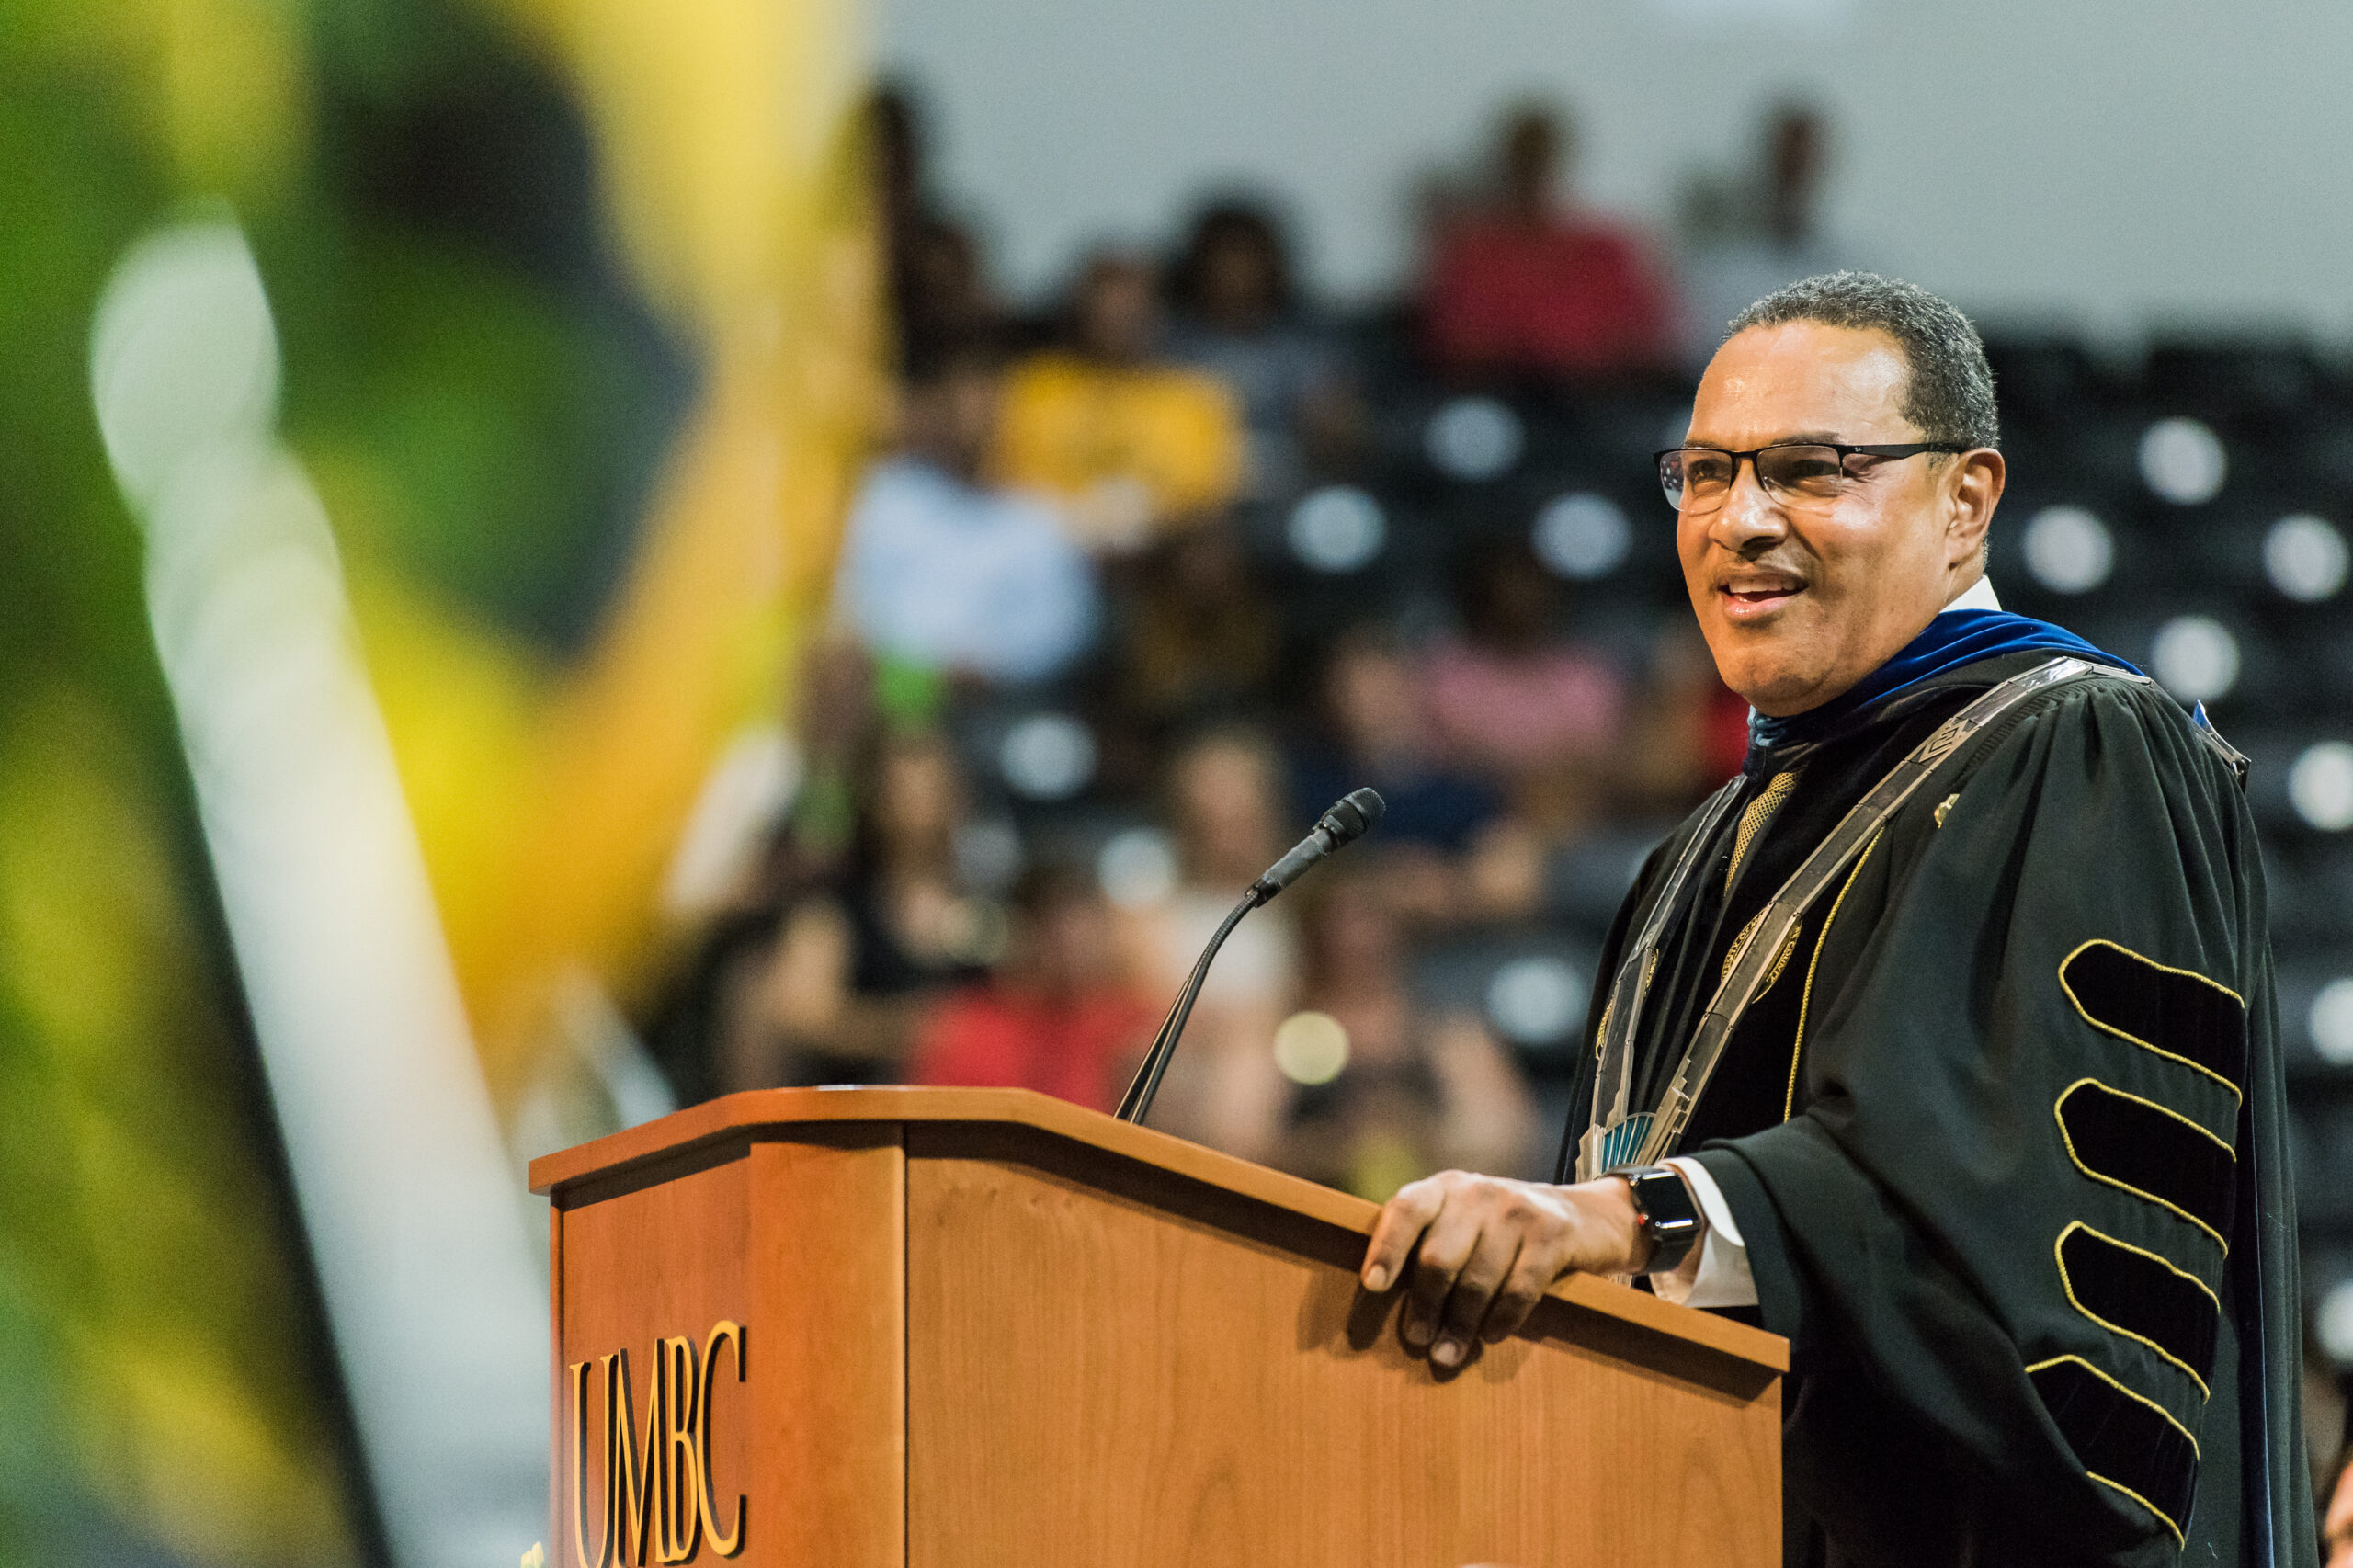 Freeman Hrabowski to continue higher ed leadership as inaugural ACE Centennial Fellow after retirement as UMBC president